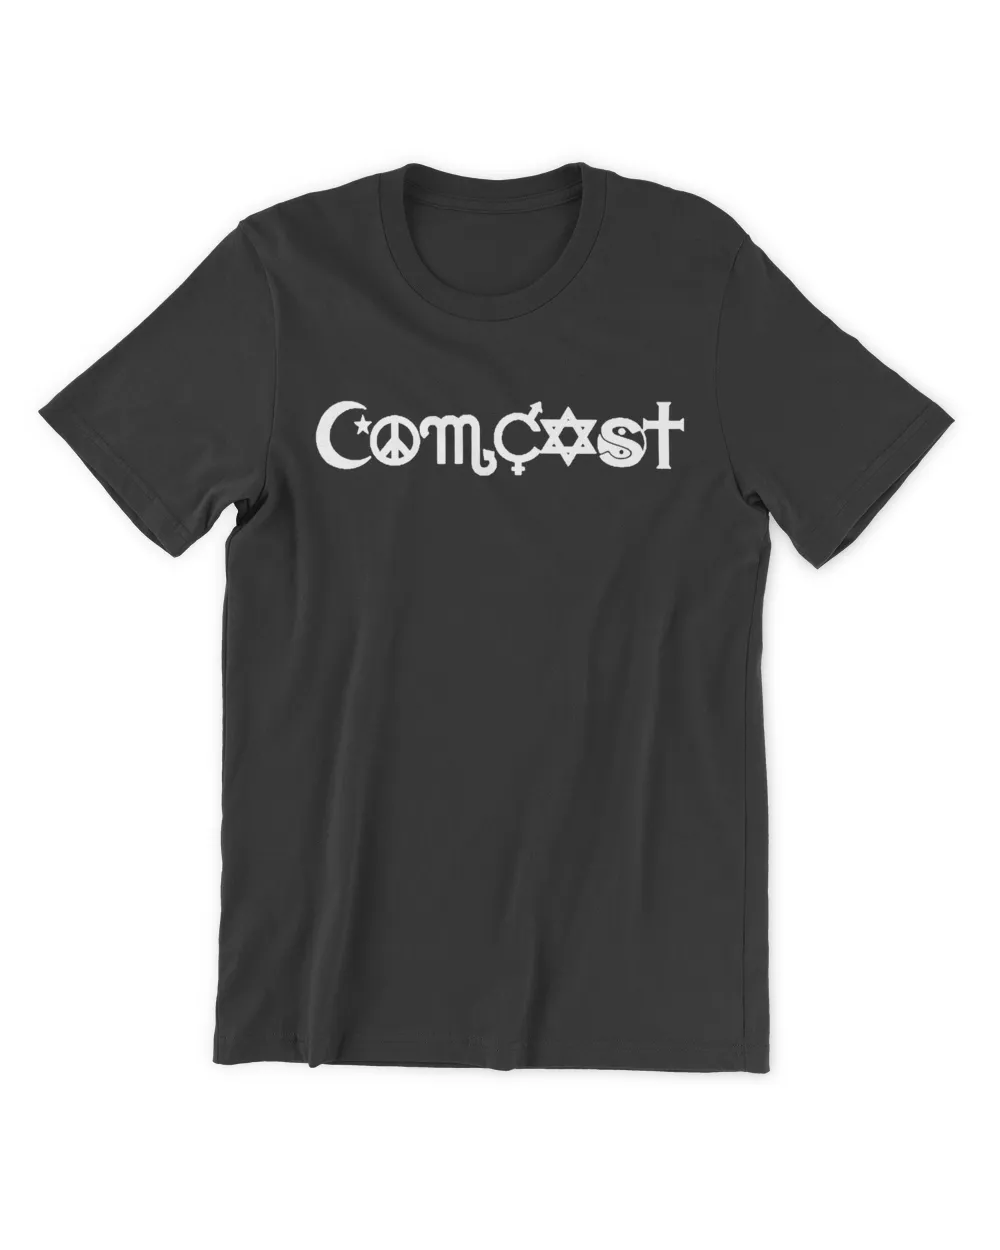 Cable Peace Shirt